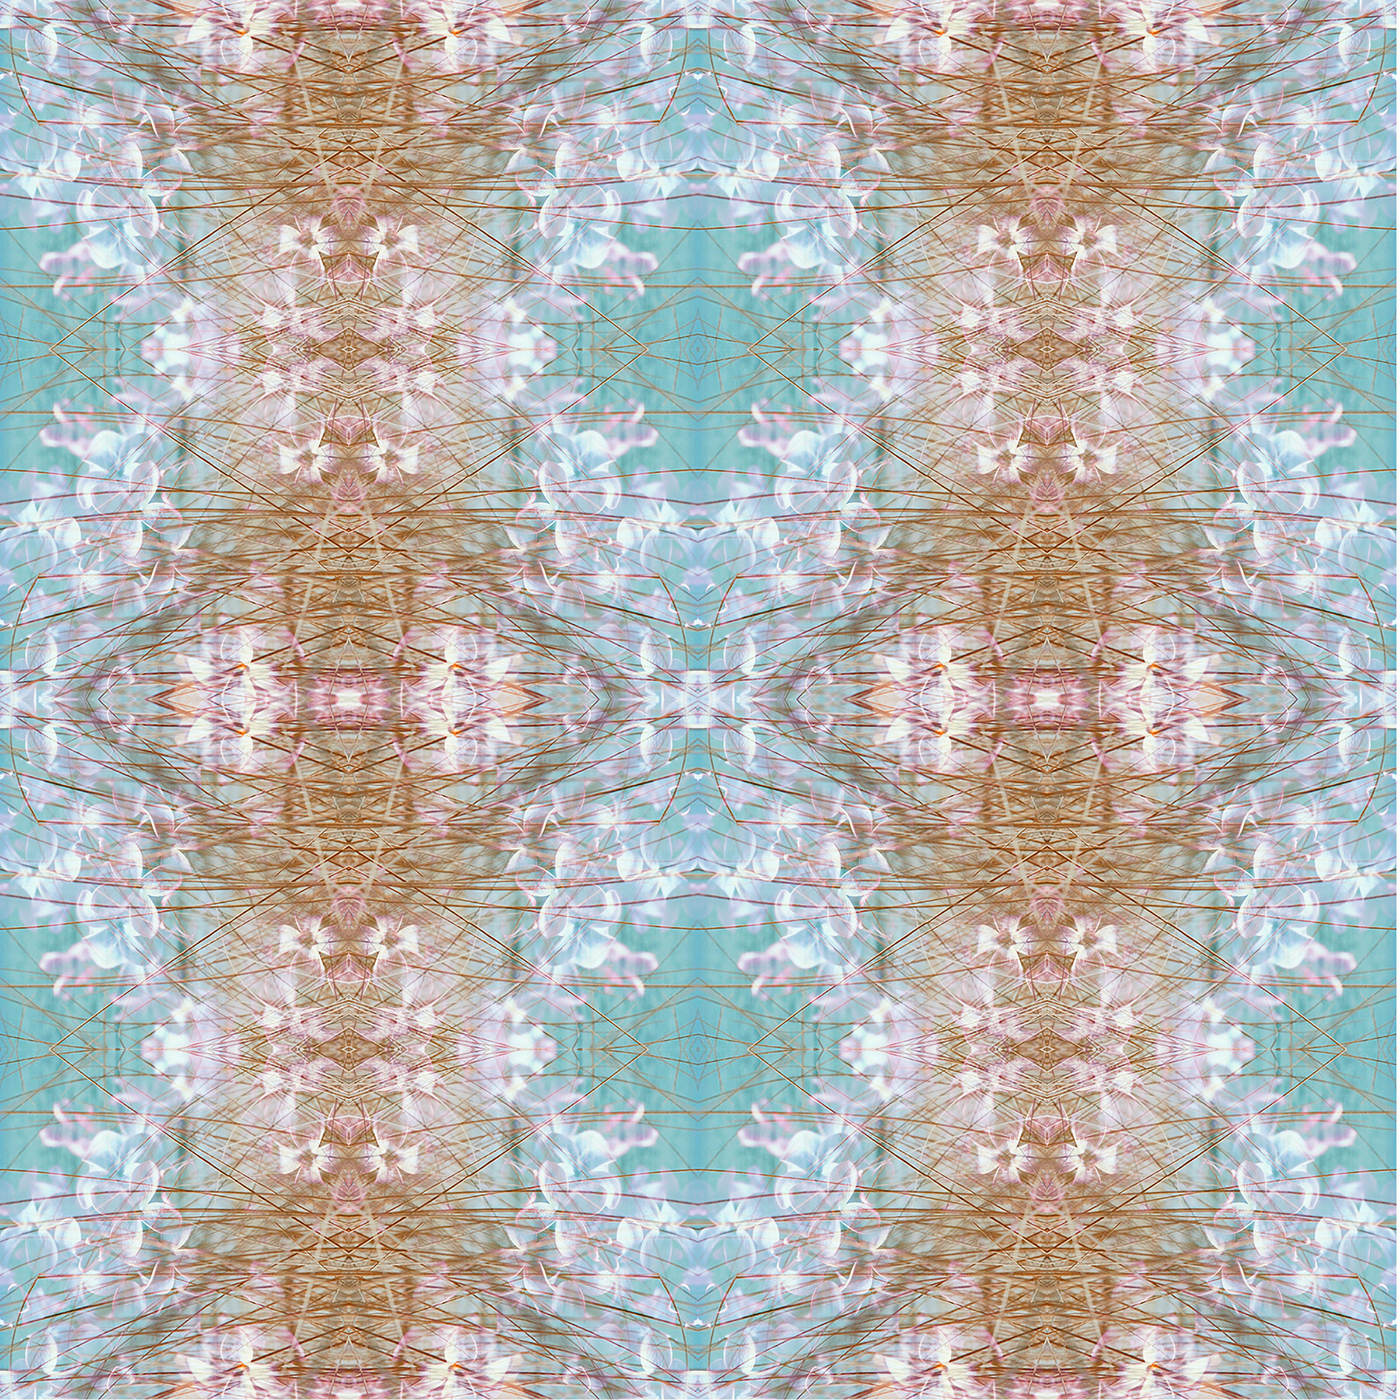 kaleidoscope mirroring photogrpahy abstract florals floral